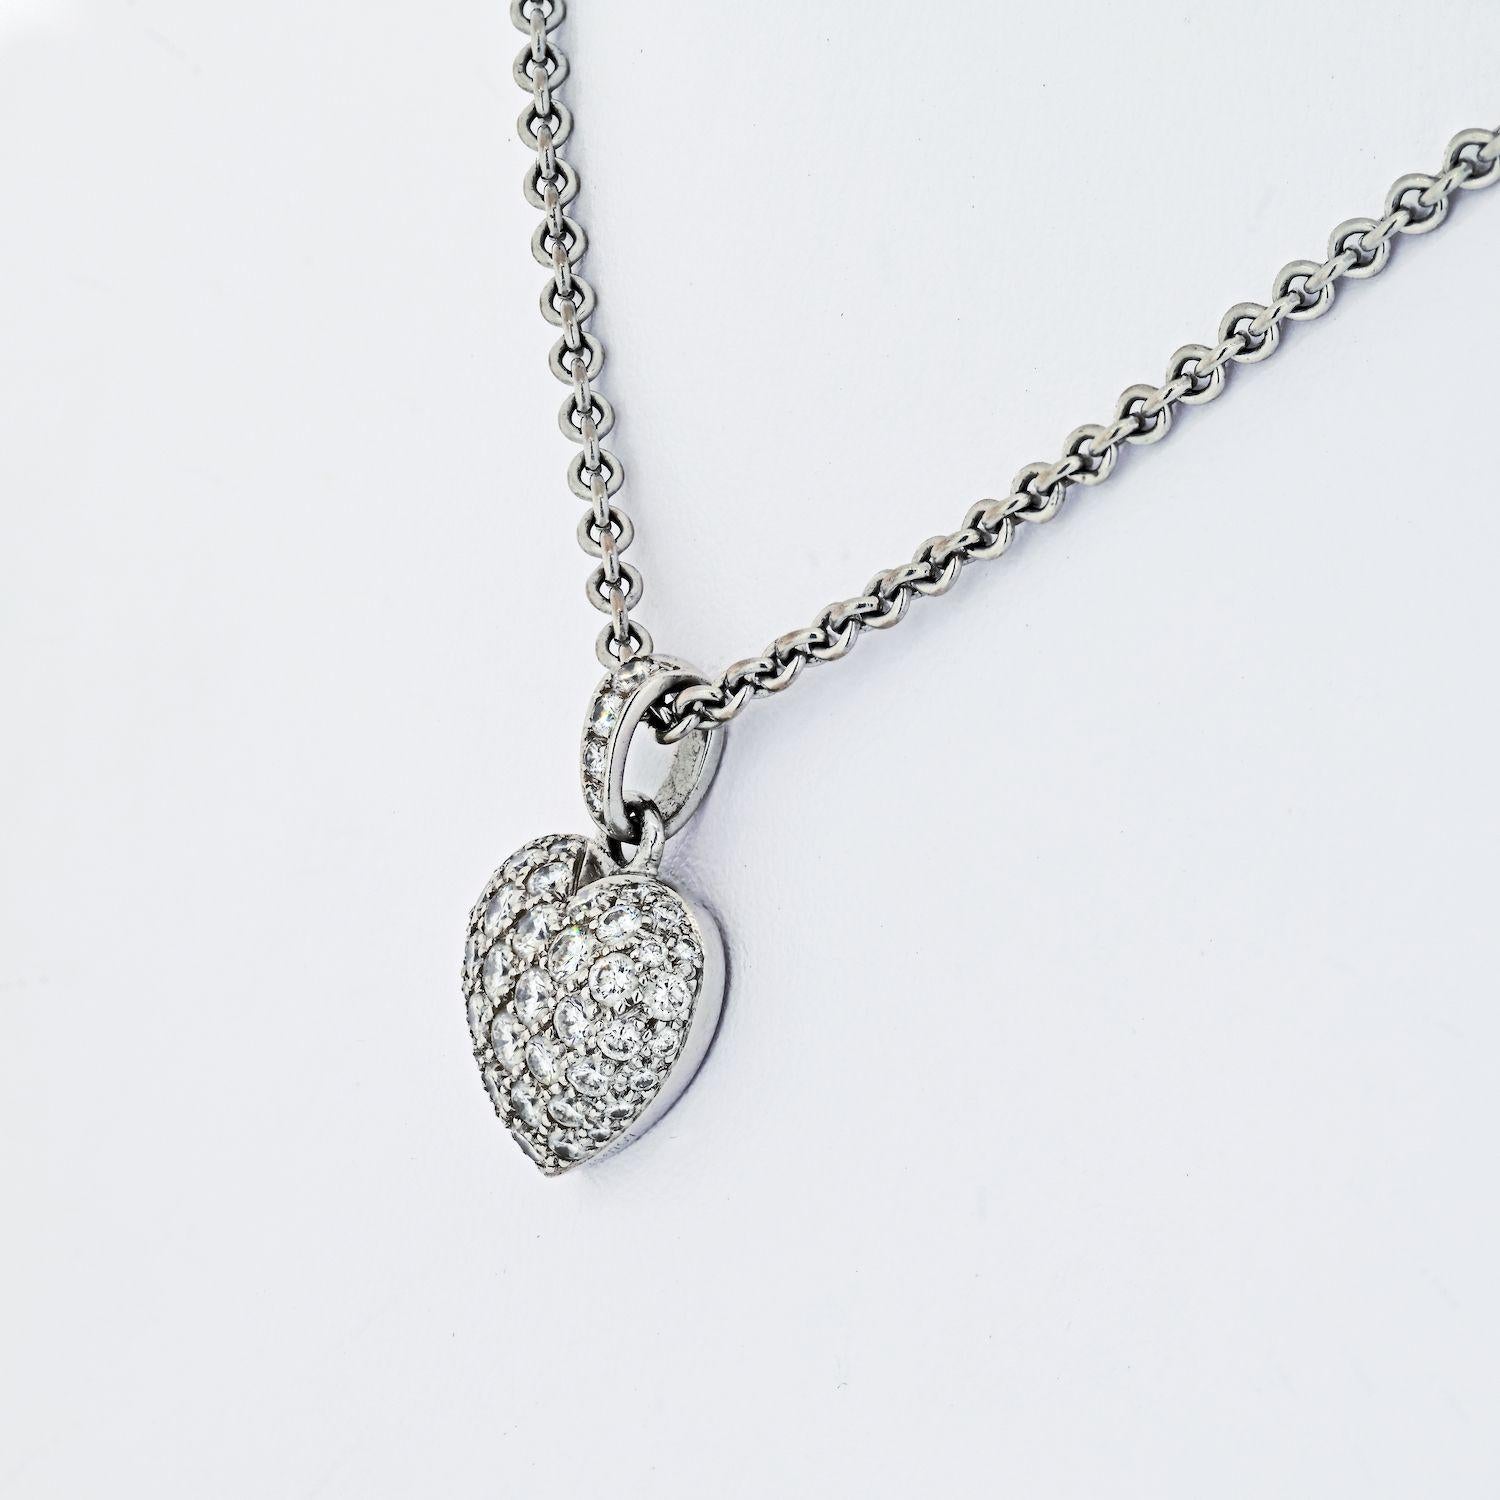 Pavé diamond 'puffed' heart pendant, with a diamond-set bale, mounted in 18k white gold, on a 16.5